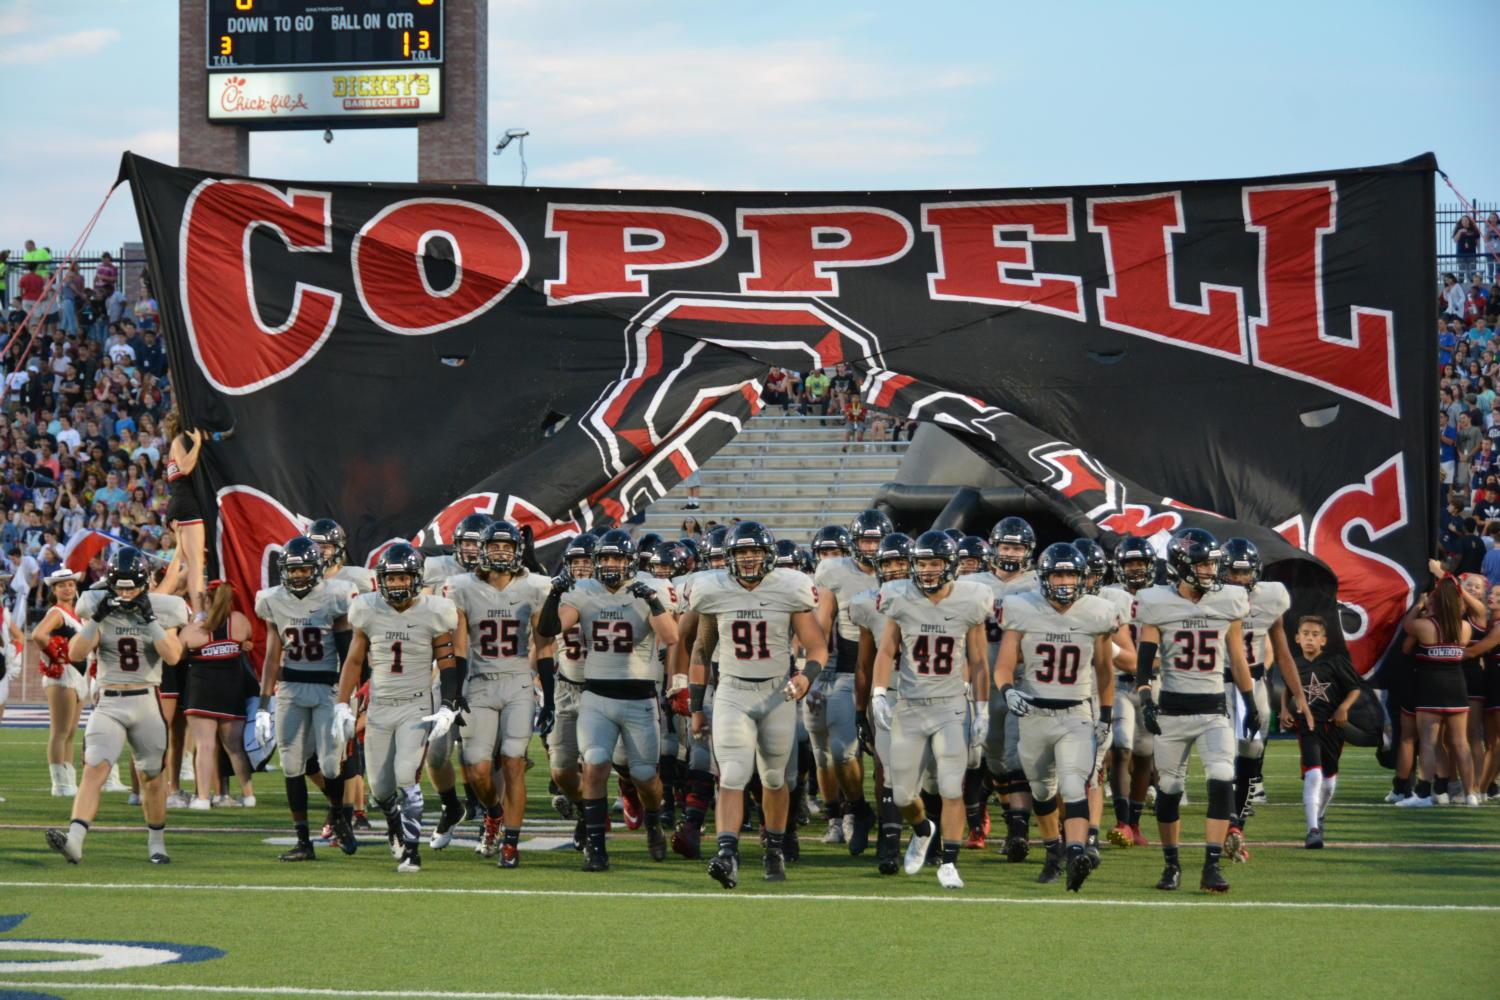 The Coppell Cowboys march their way out onto the field Friday night against the Allen Eagles. The Cowboys lost 35-23 to the state-ranked team.